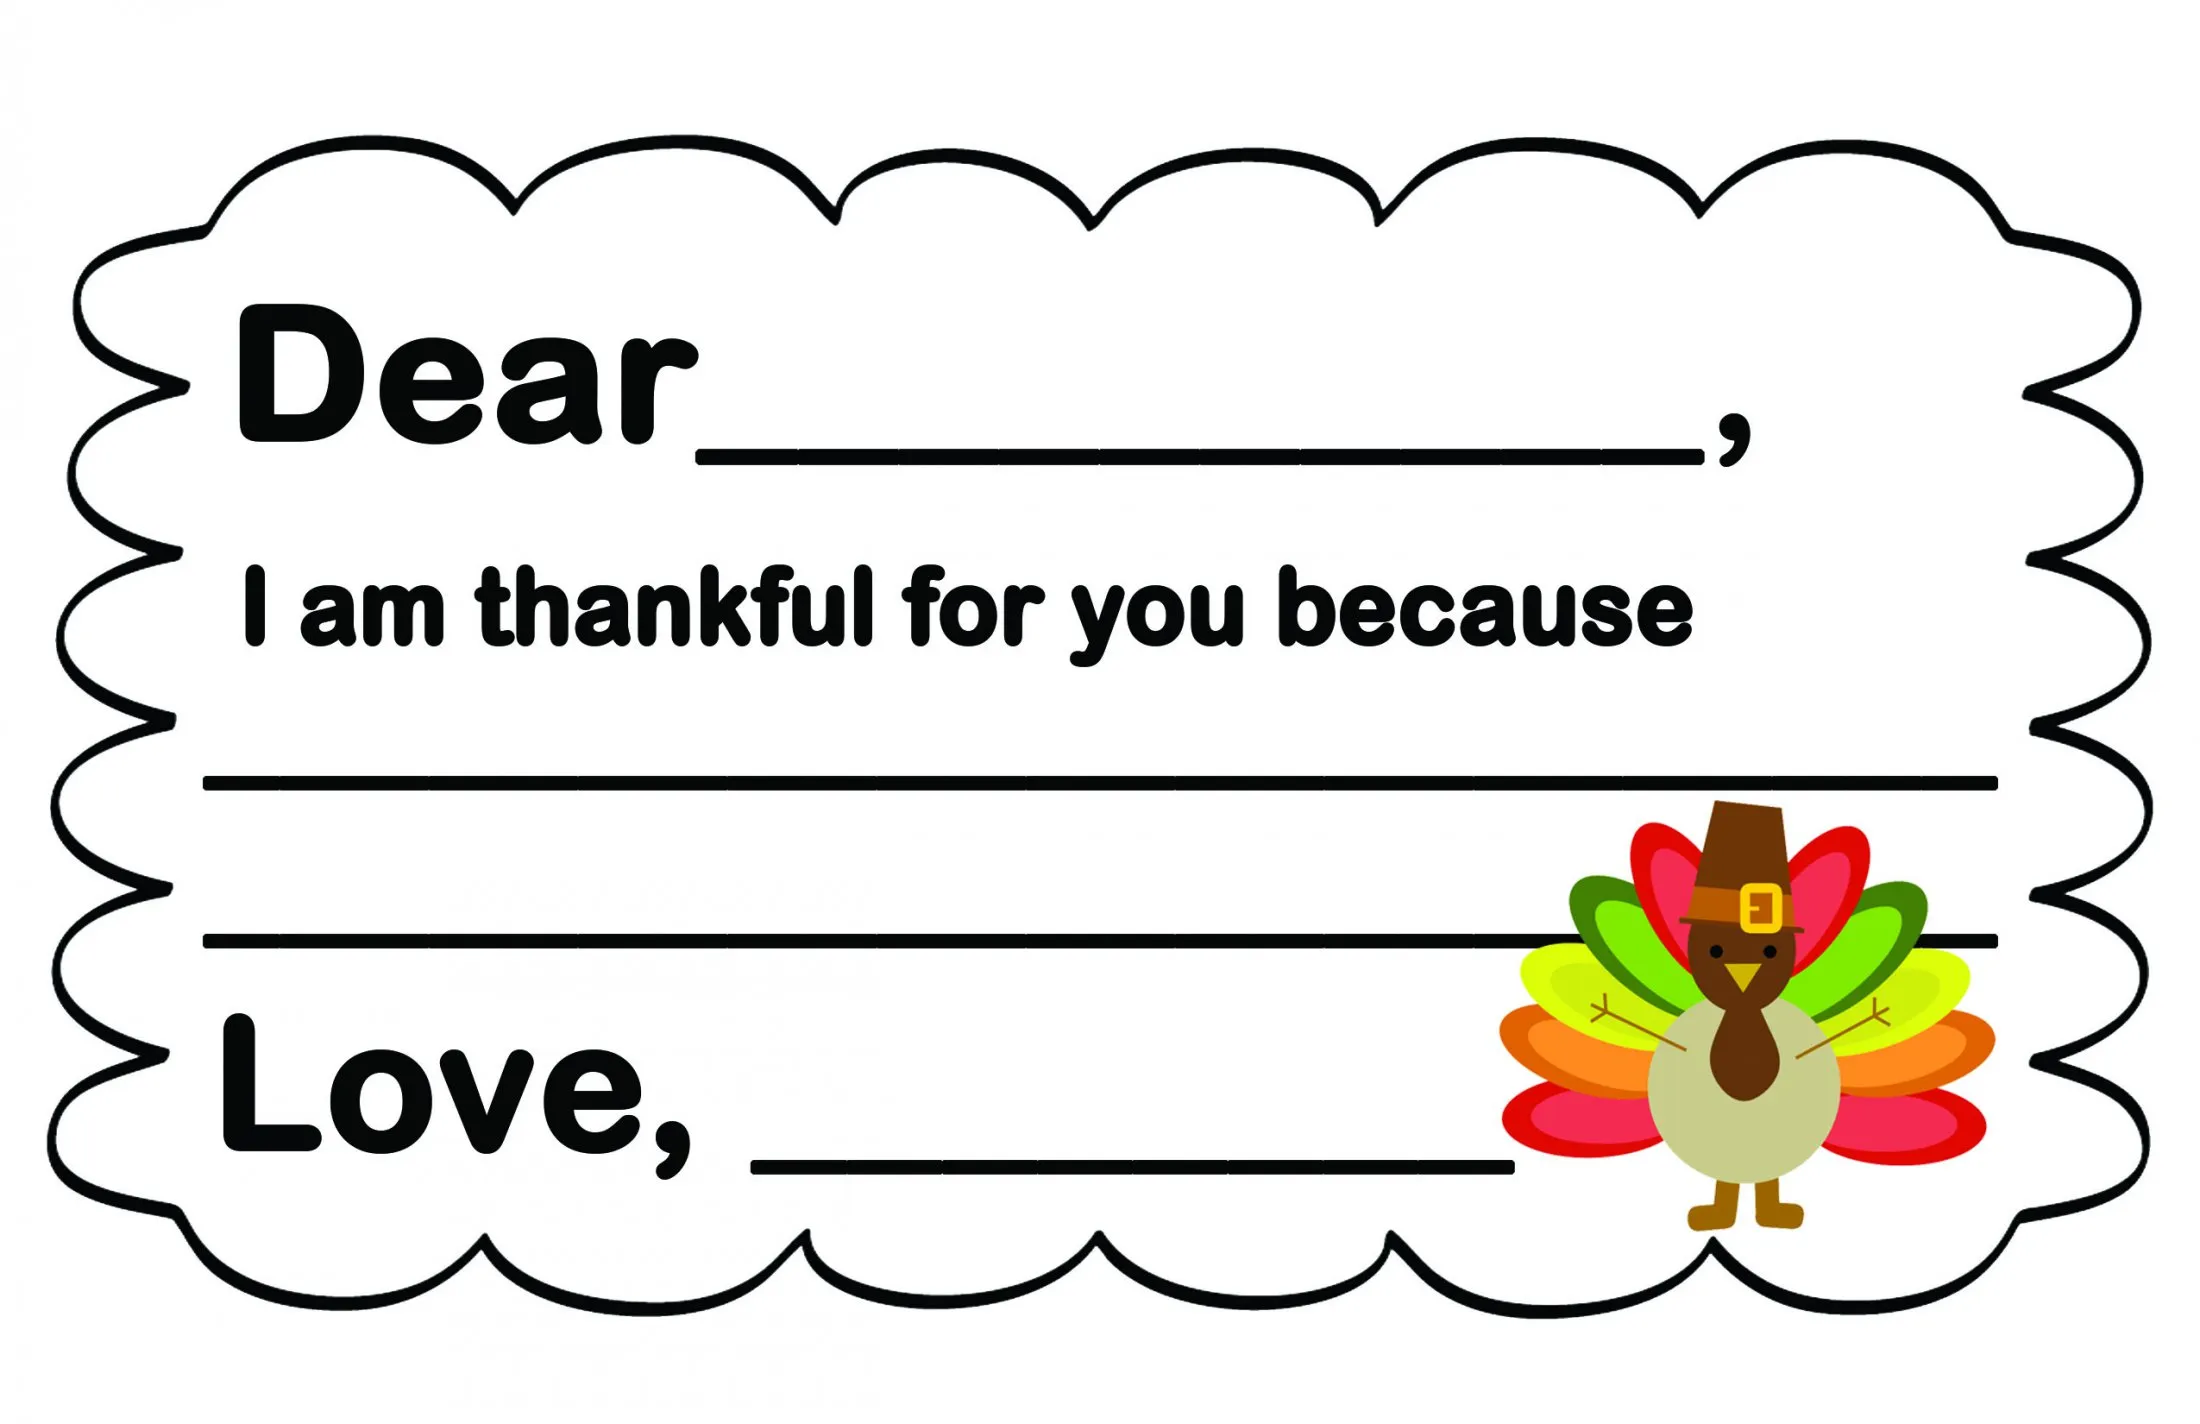 Thankful for you letter